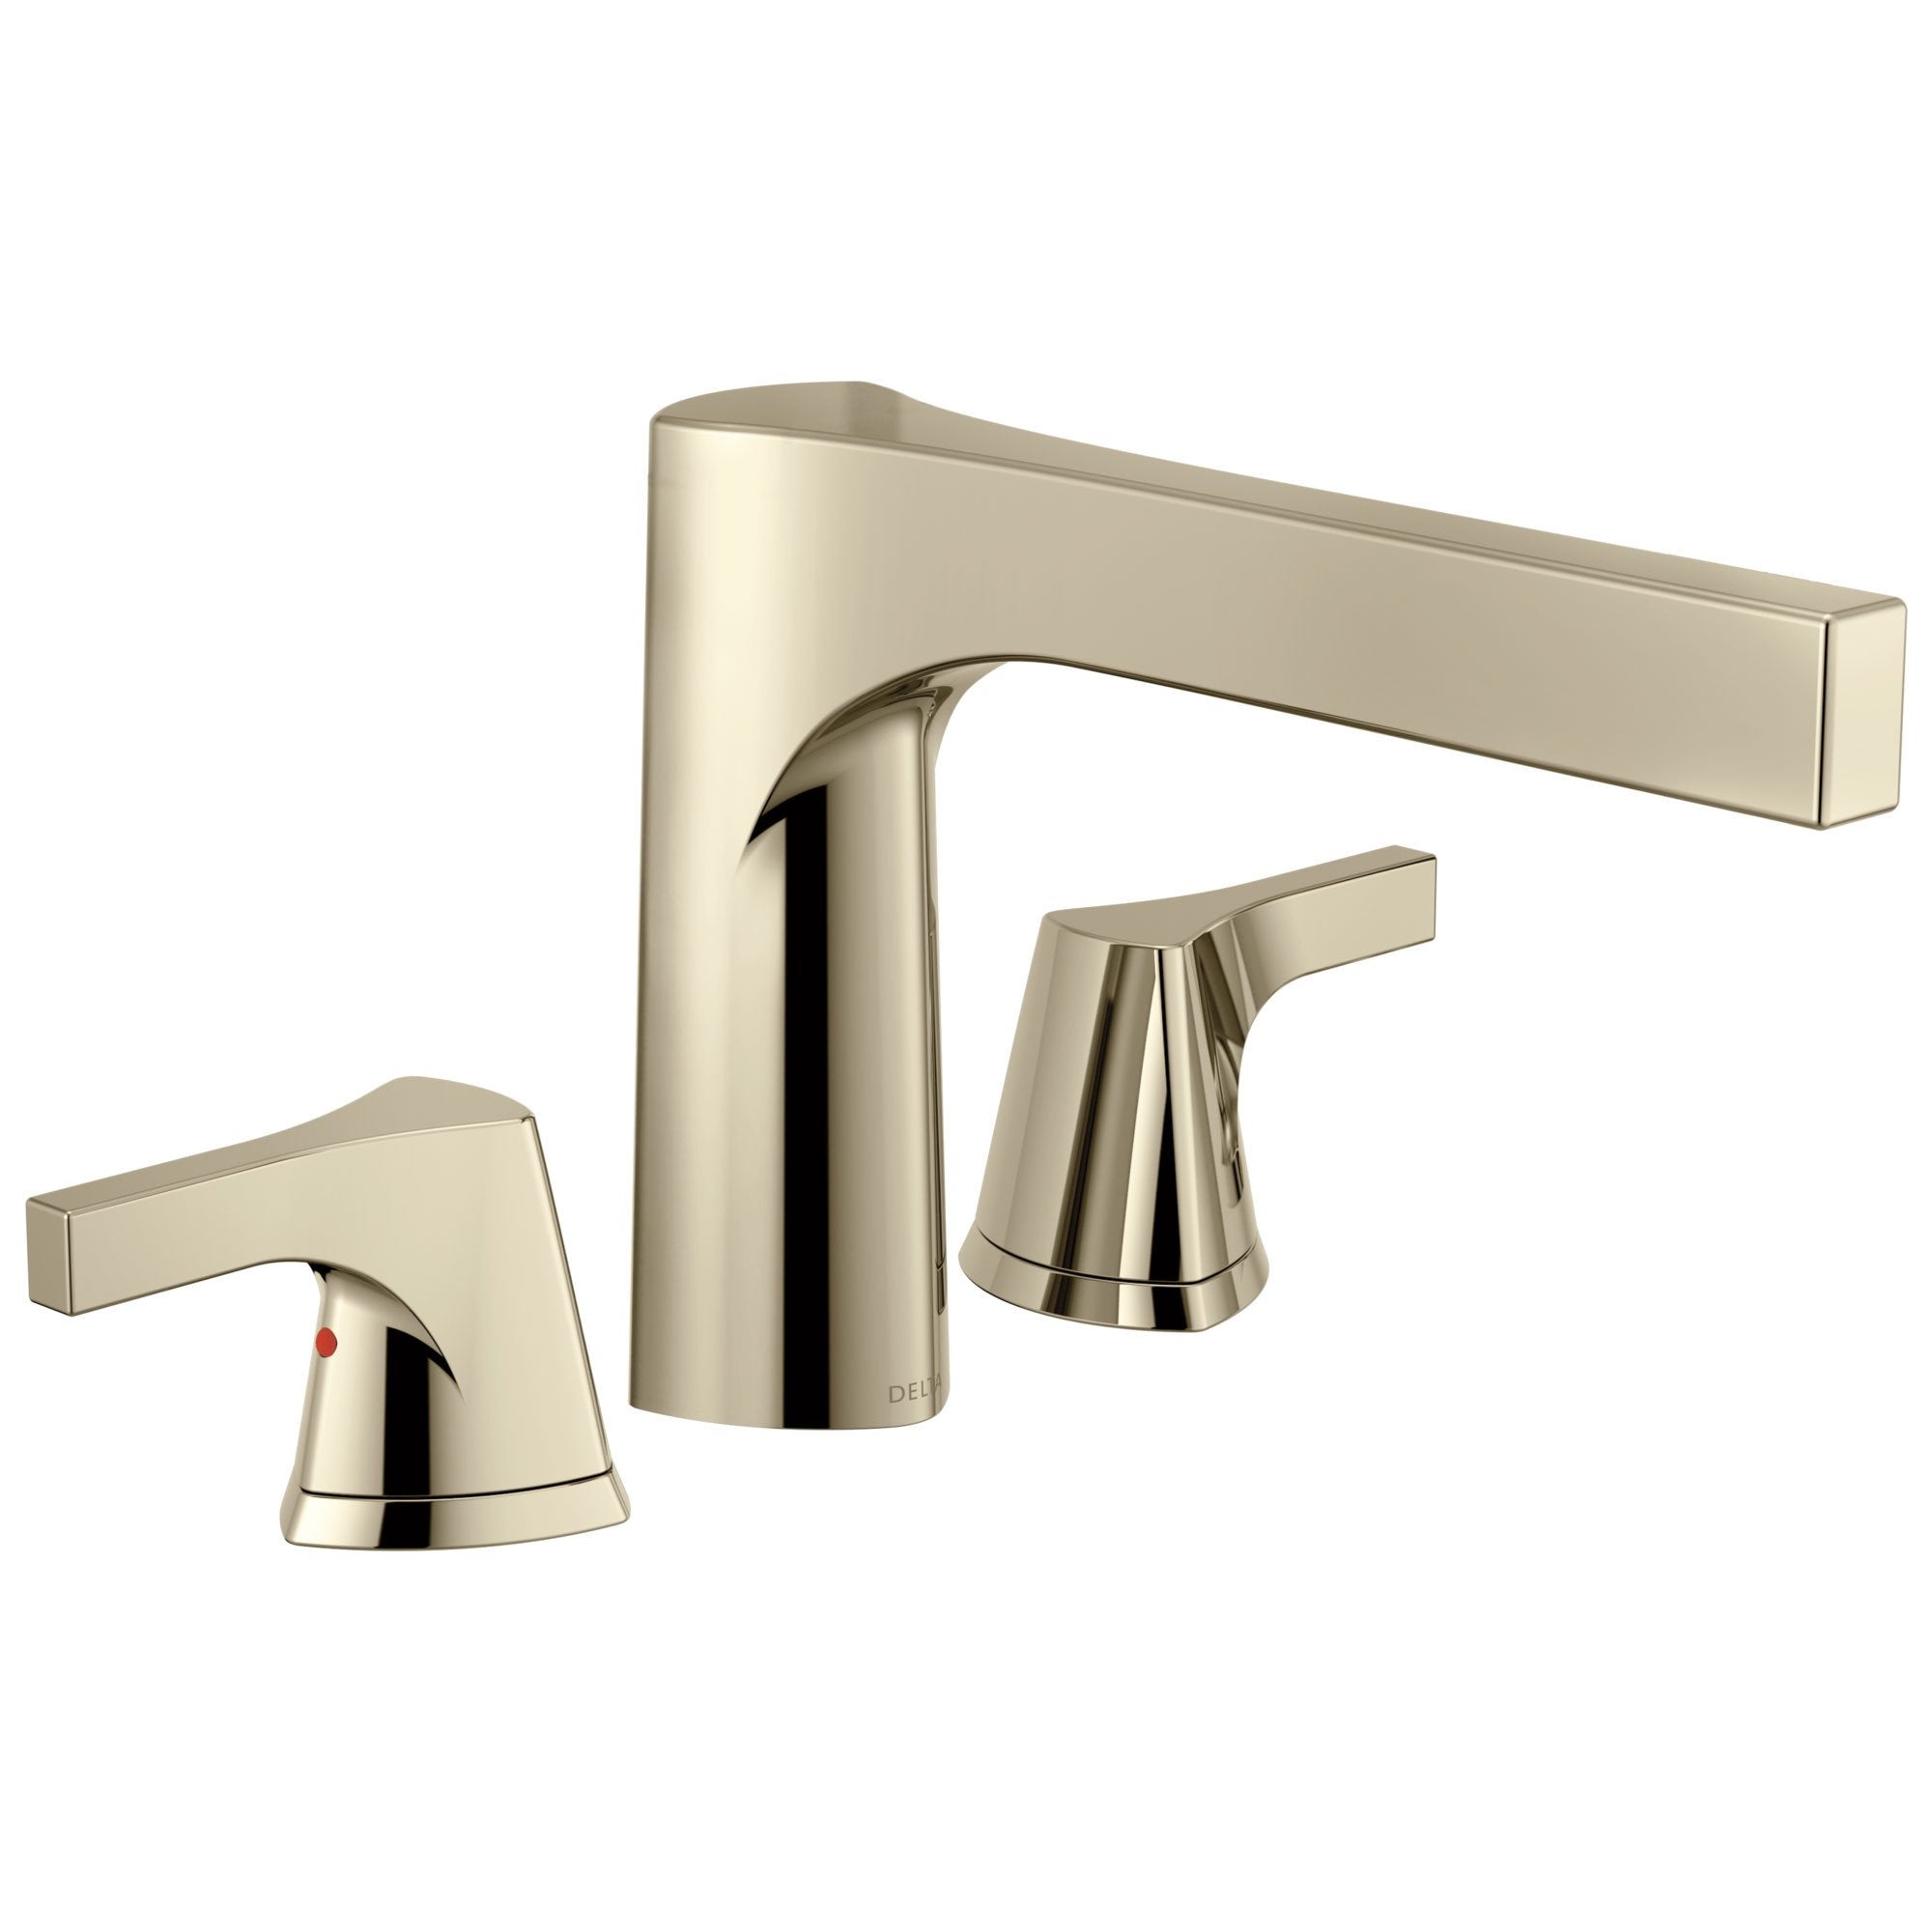 Delta Zura Collection Modern Polished Nickel Finish 3-Hole Roman Tub Filler Faucet Trim Kit (Requires Rough-in Valve) 743934